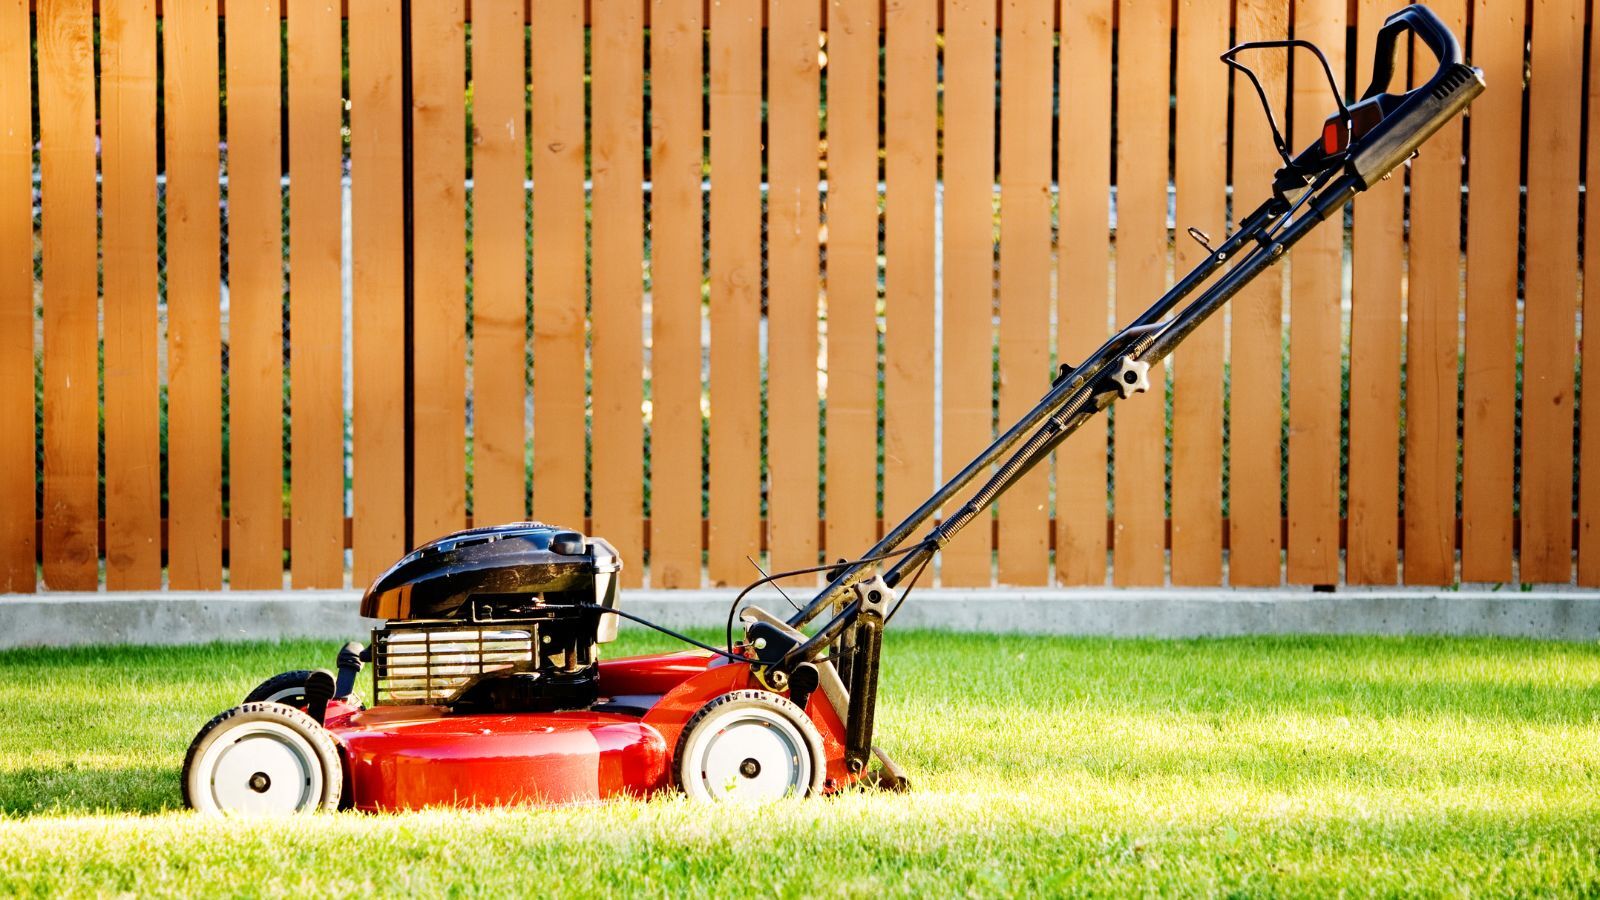 A Complete Buying Guide for Best Manual Push Mowers